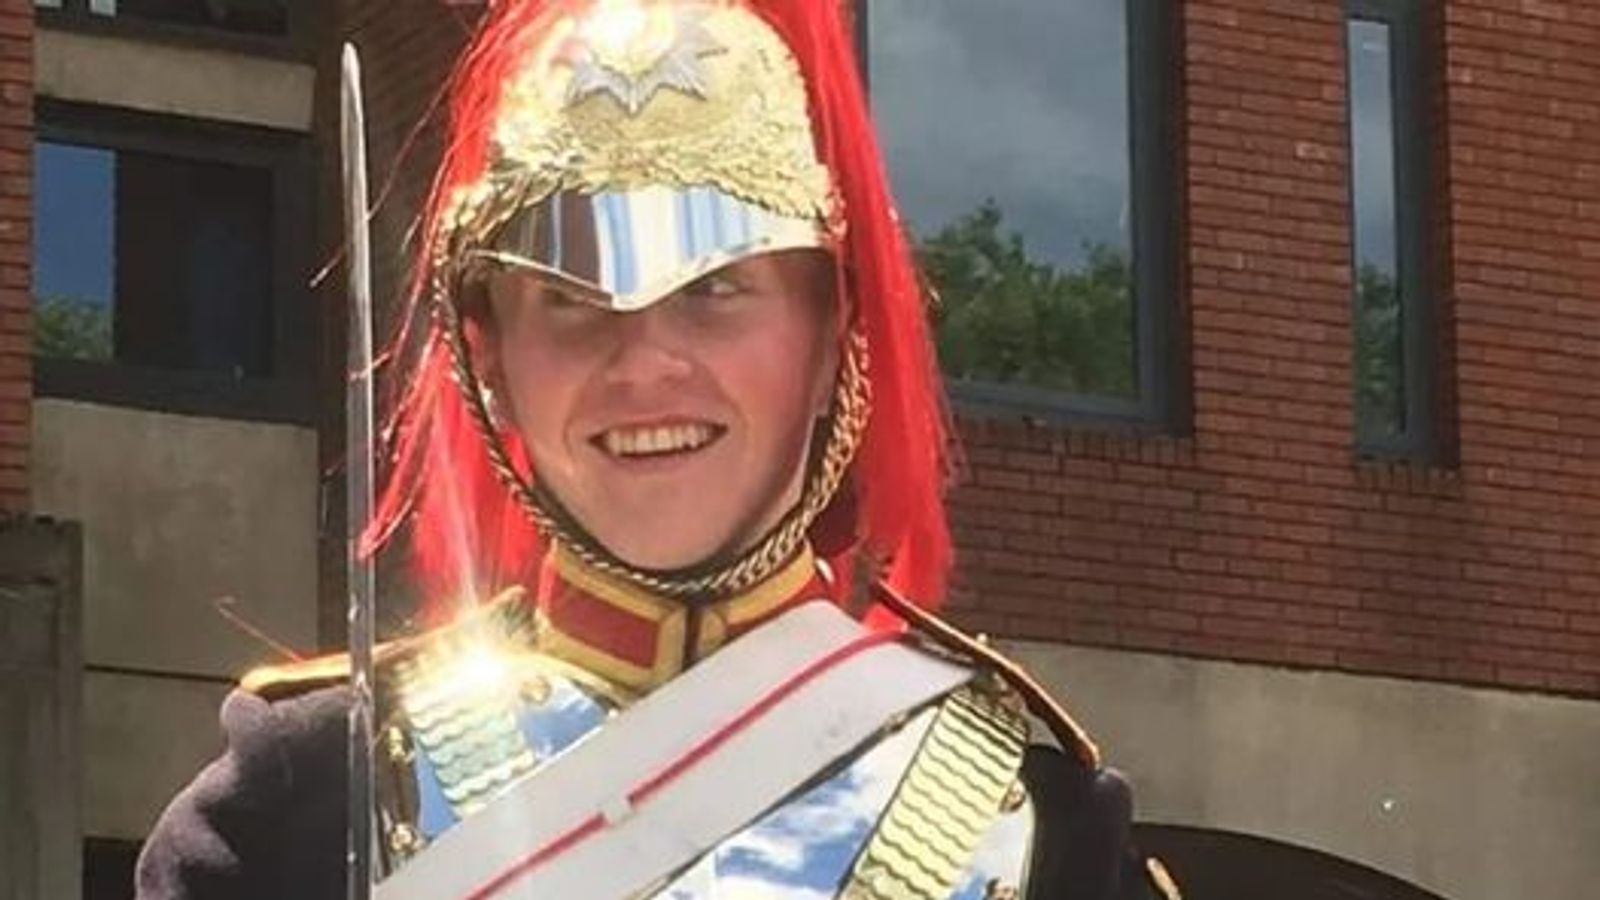 Soldier, 18, who took part in Queen's state funeral found dead at barracks